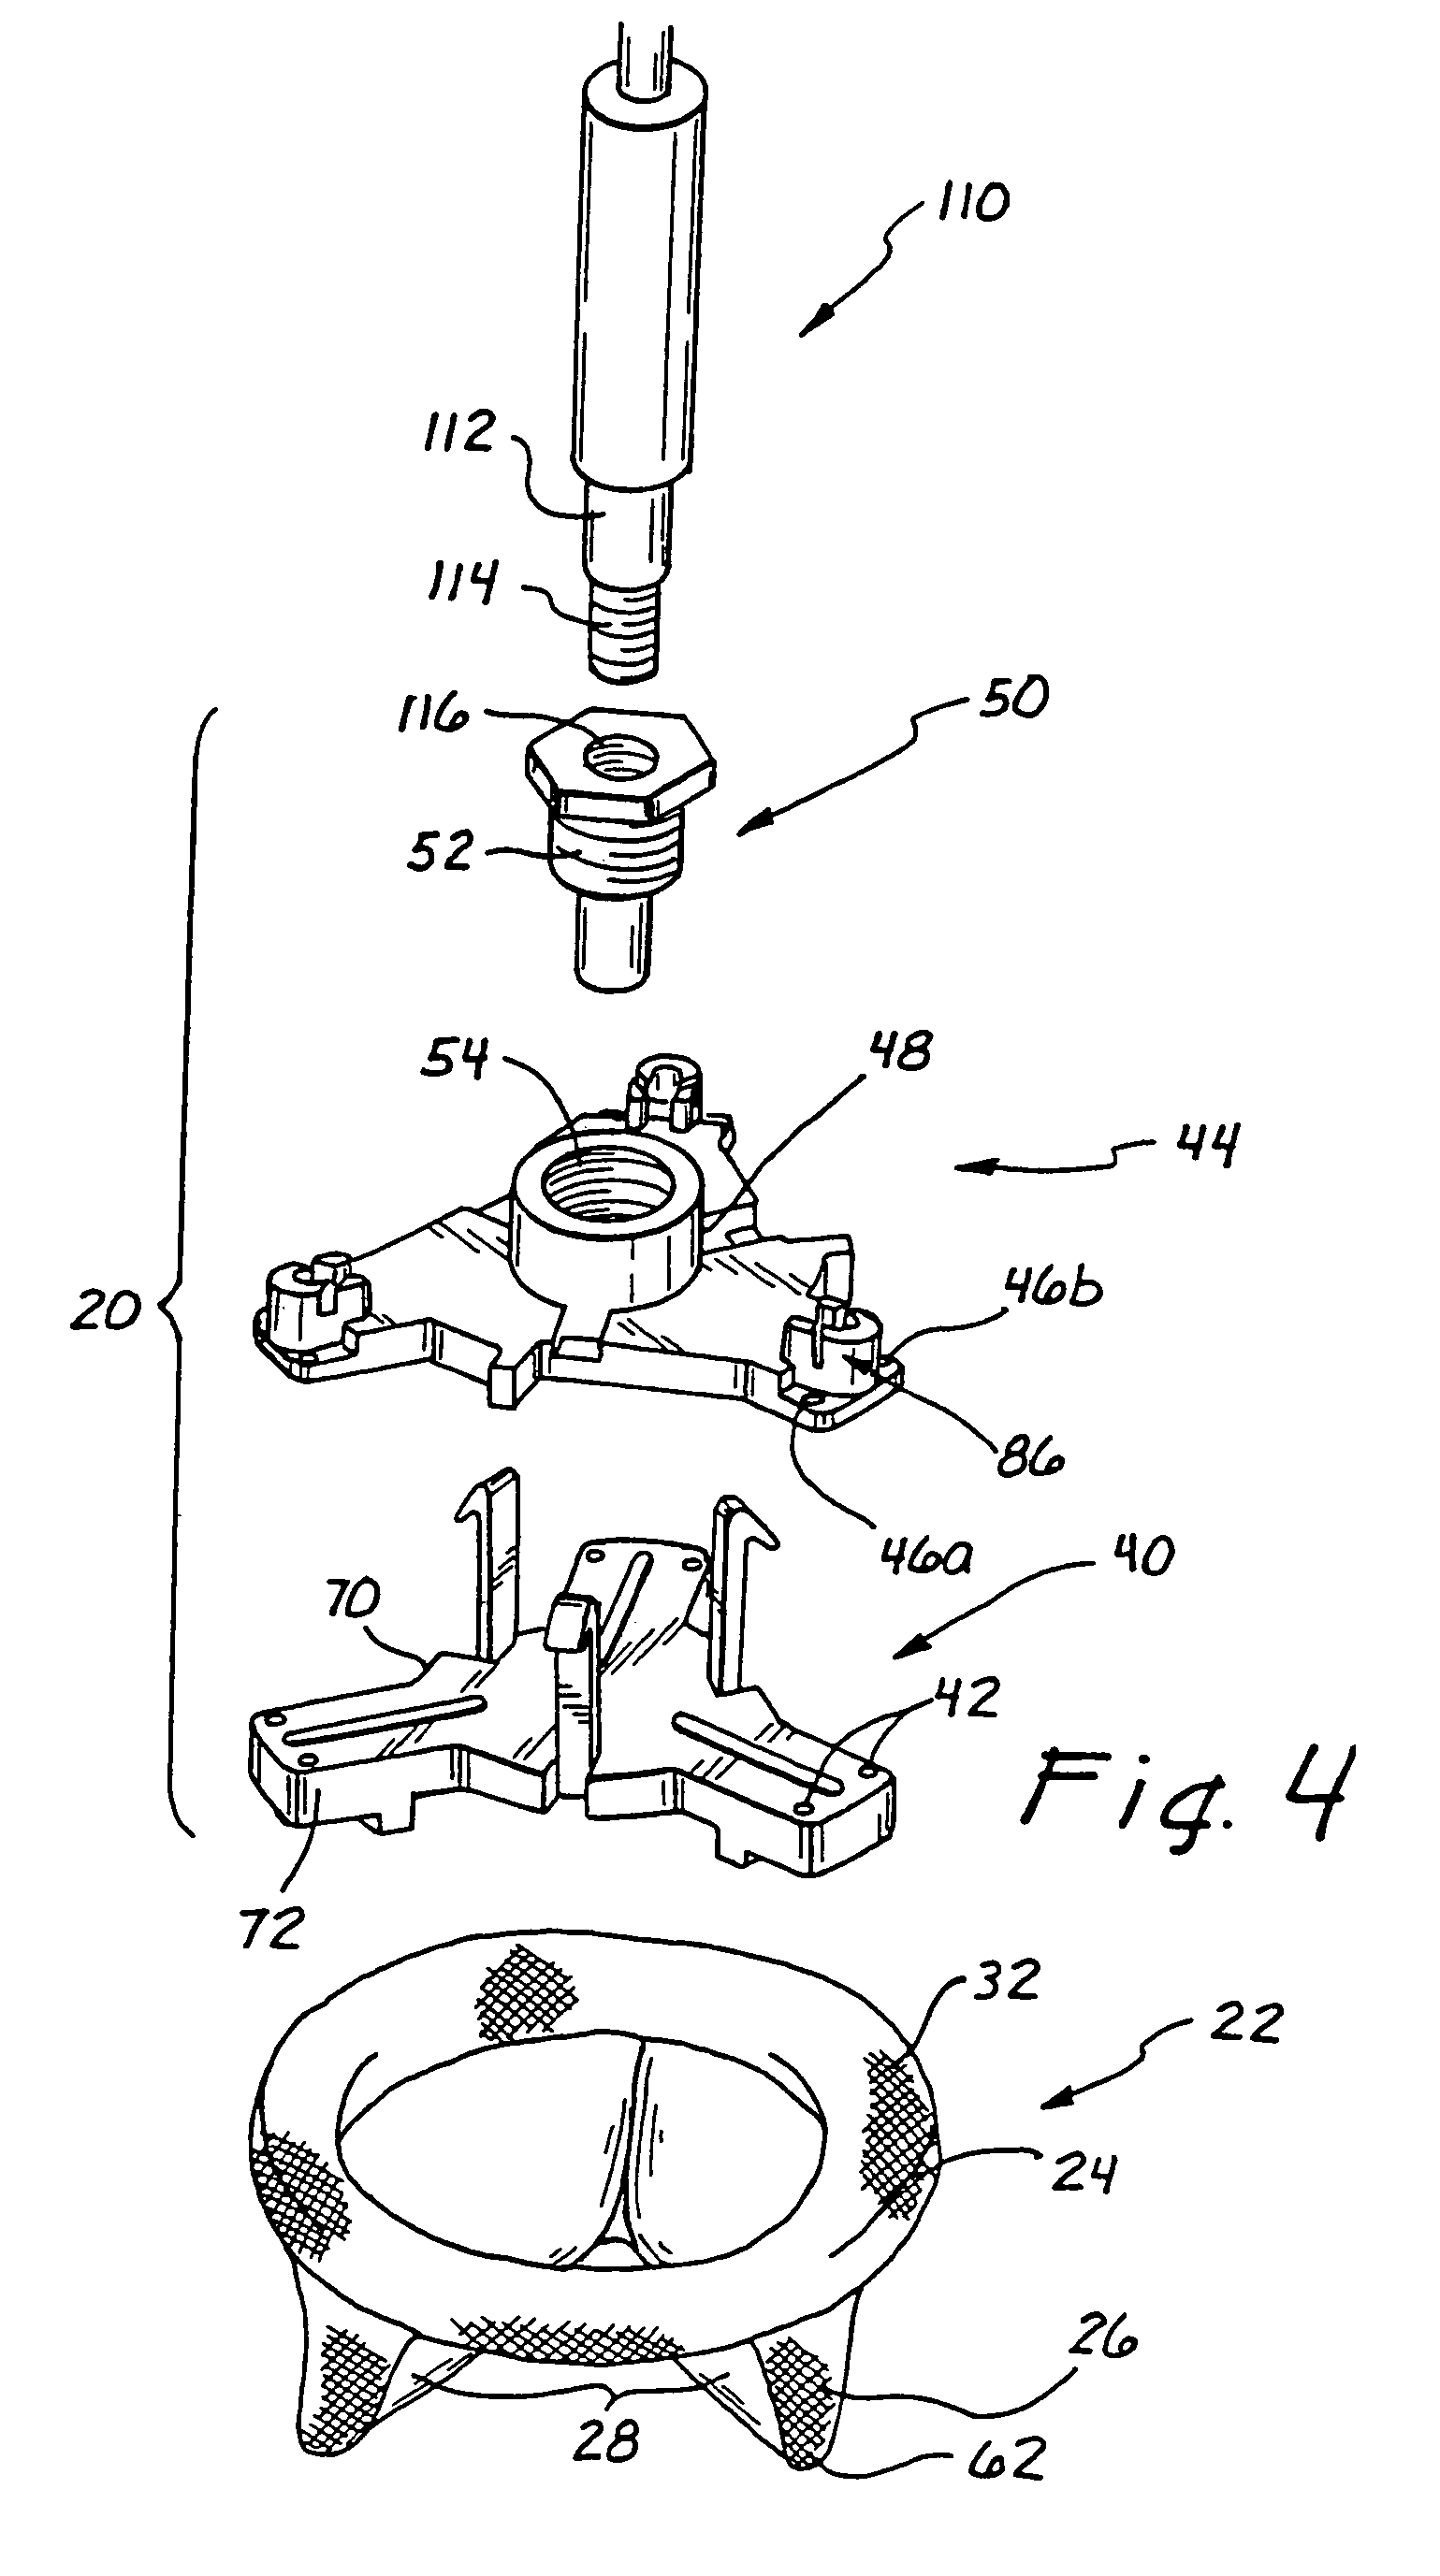 Heart valve holders and handling clips therefor